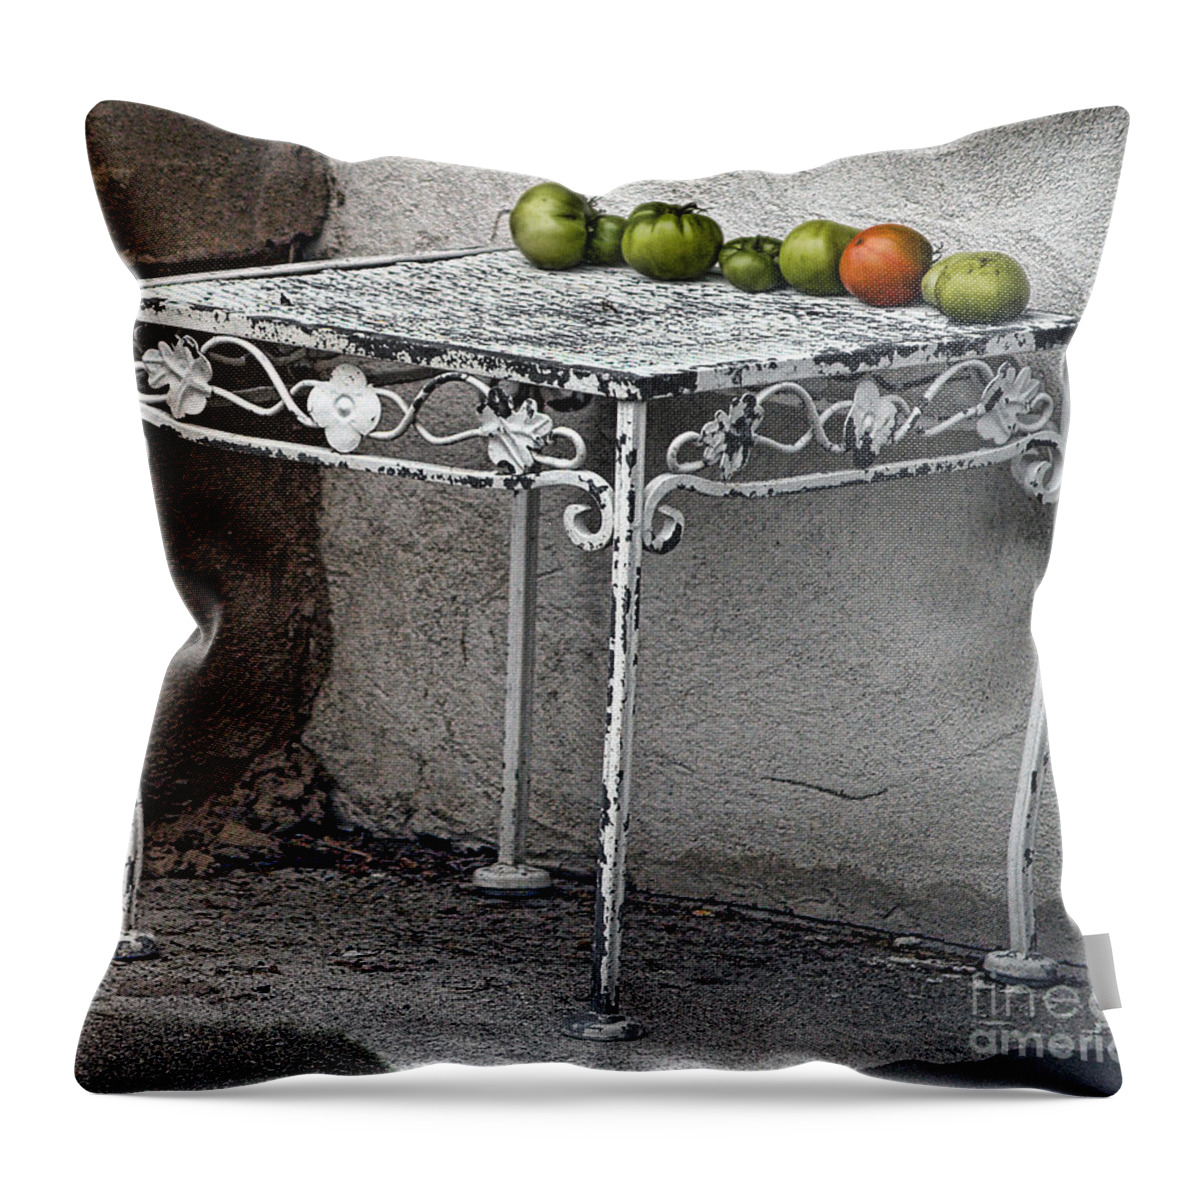 Tomato Throw Pillow featuring the photograph You Say Tomatoes by Terry Doyle